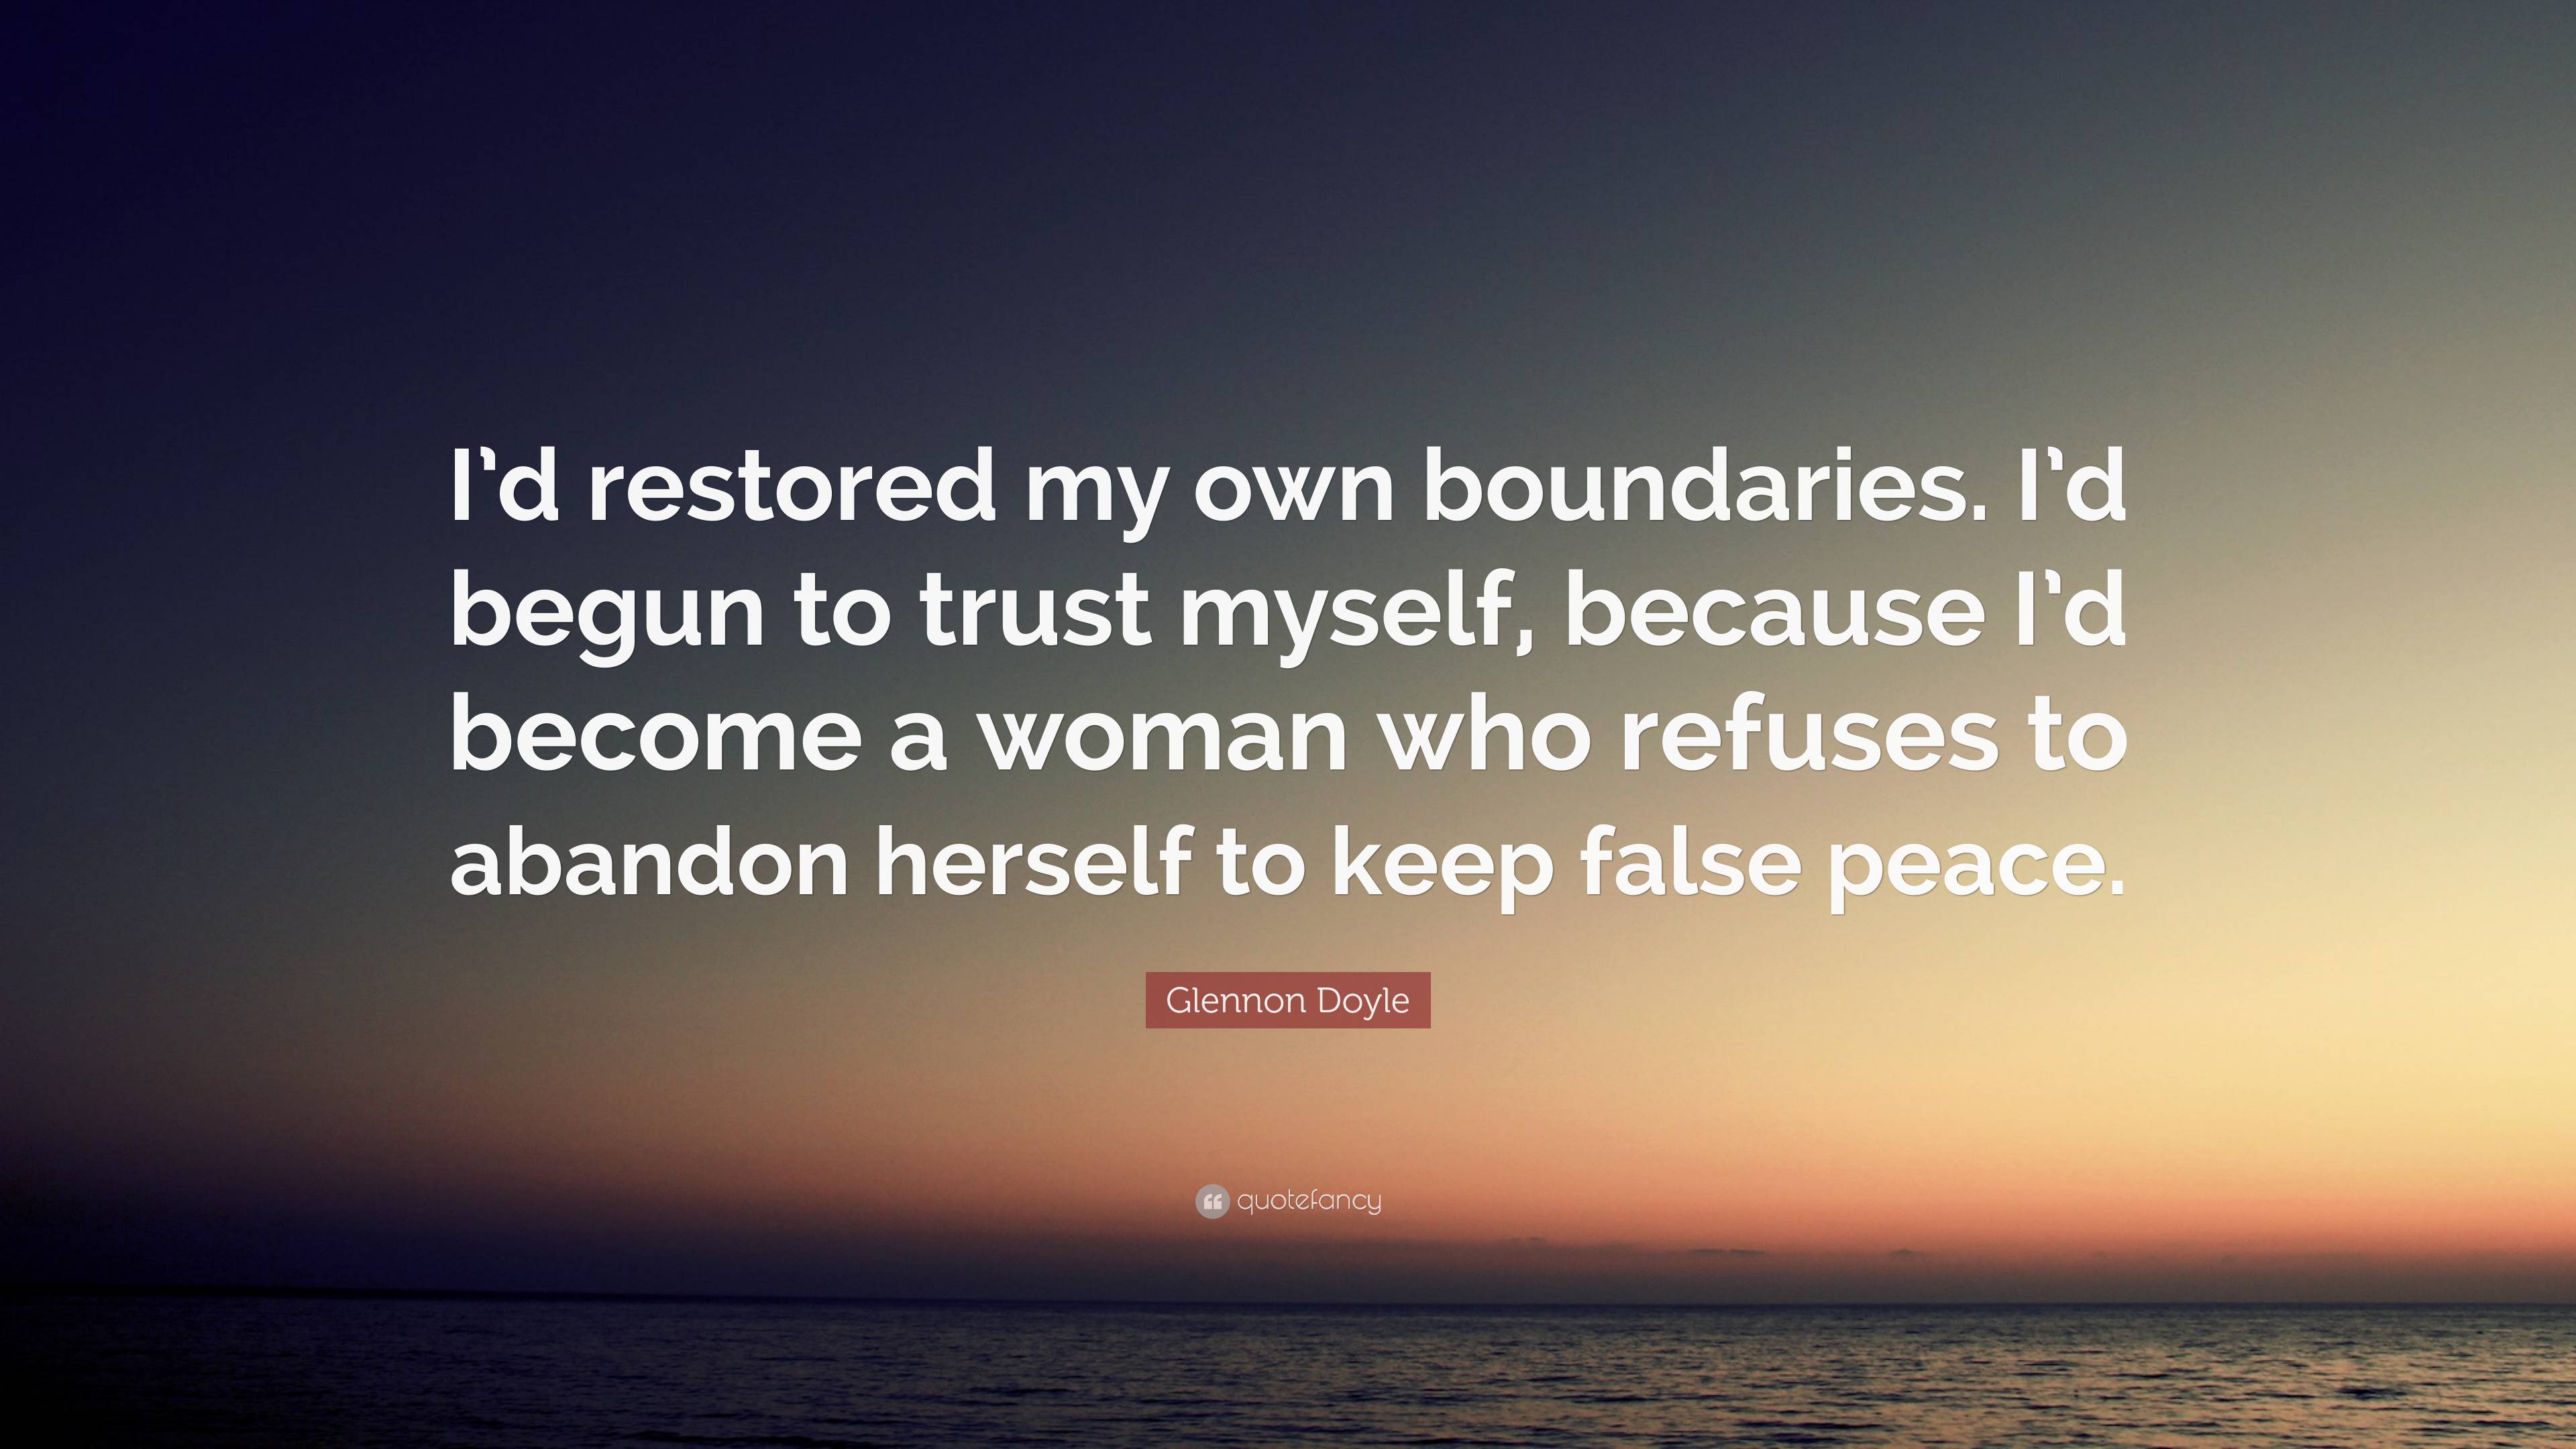 Glennon Doyle Quote: “I'd restored my own boundaries. I'd begun to